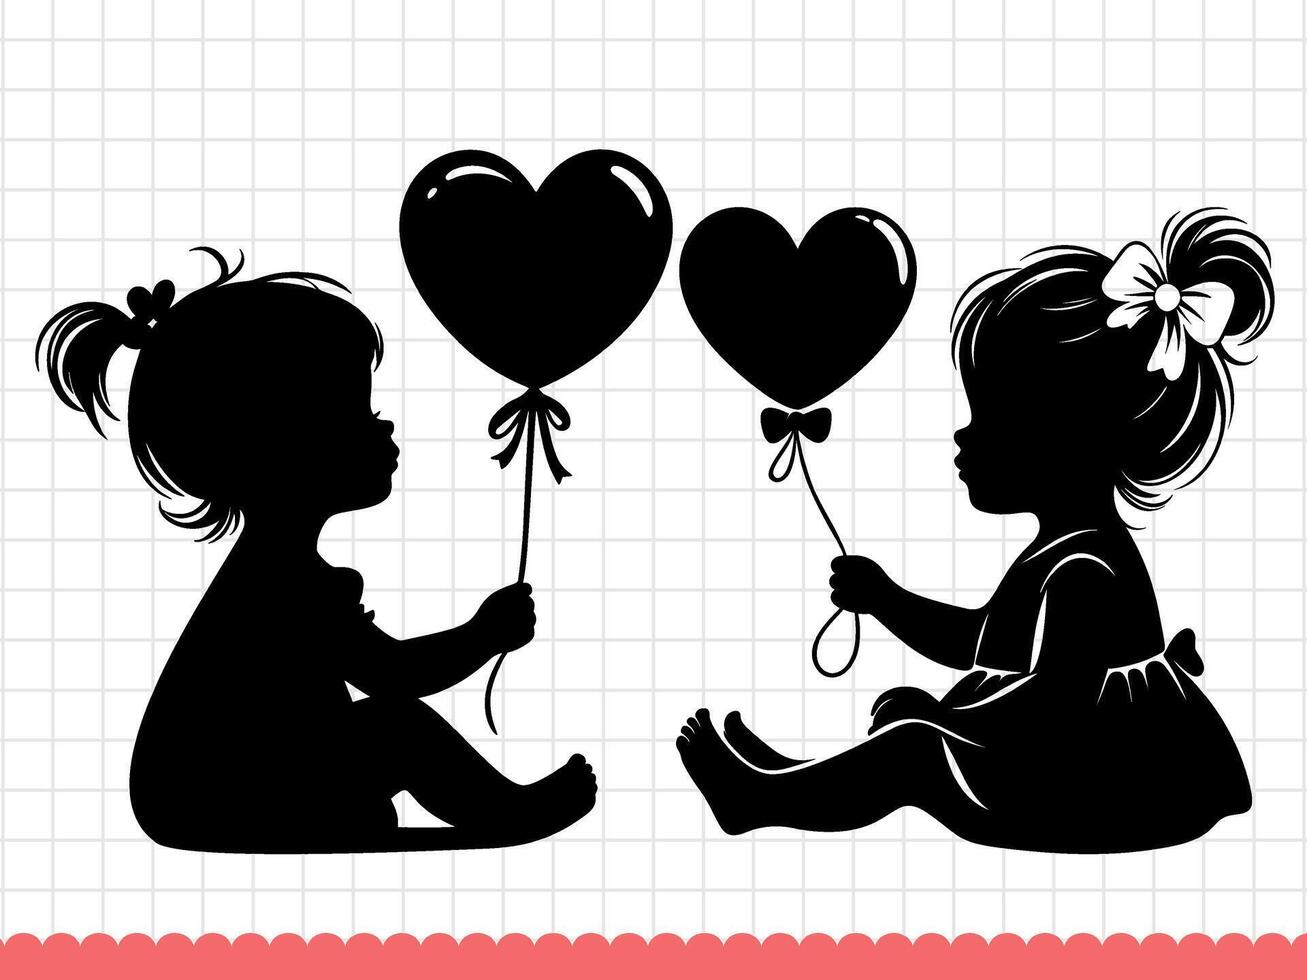 Cute baby girls silhouettes with heart shaped balloon. Vector illustration.